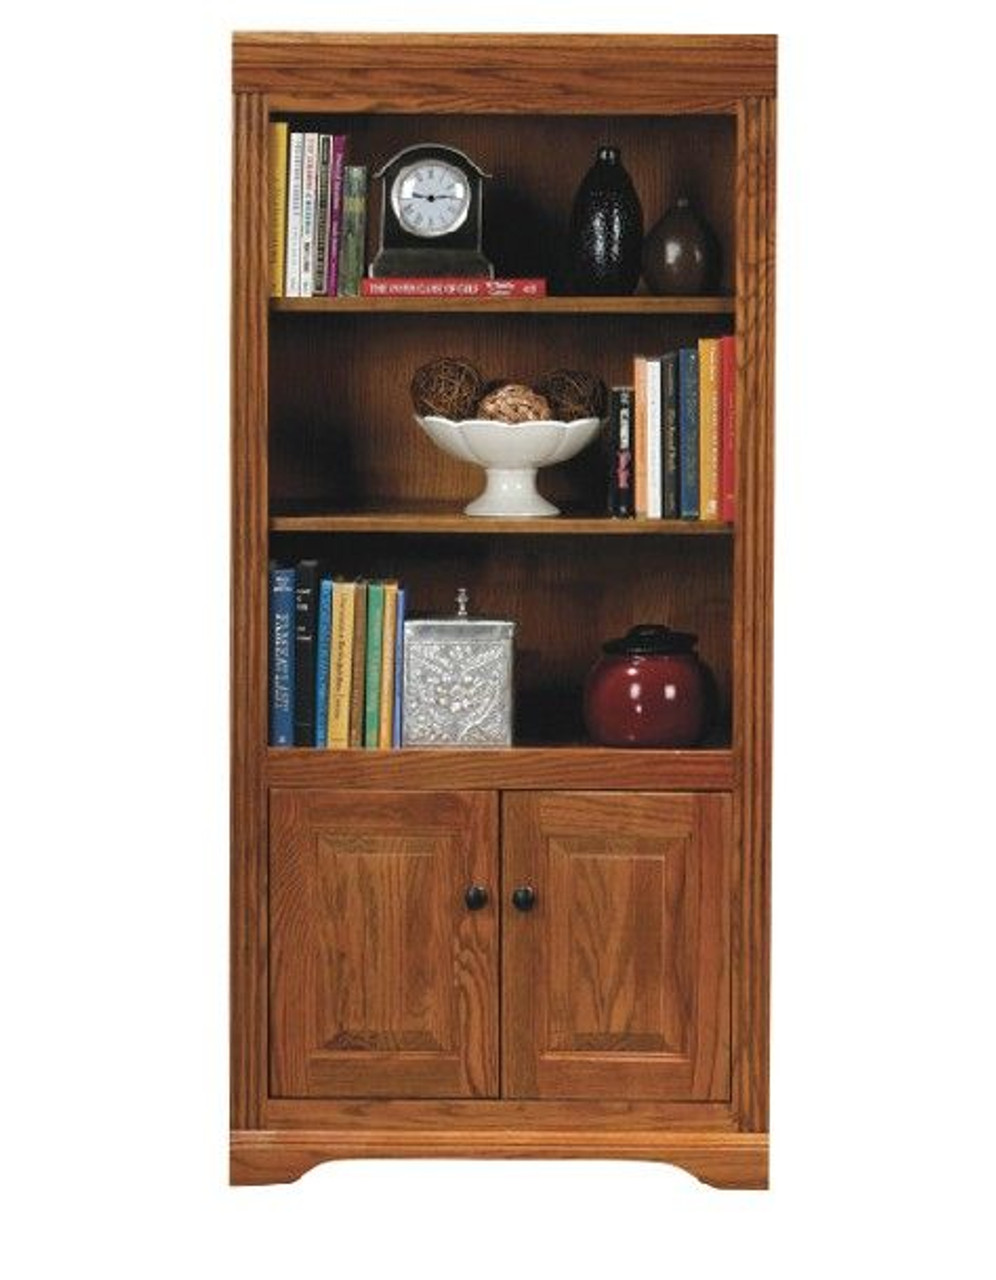 Eagle 28 x 60" Bookcase Mills Oak Ridge American Hardwood Home Office Library Furniture with Raised Panel Wood Doors, 2 Adjustable Shelves, Fluted Detail and Arched Base Trim, Part # E-93460